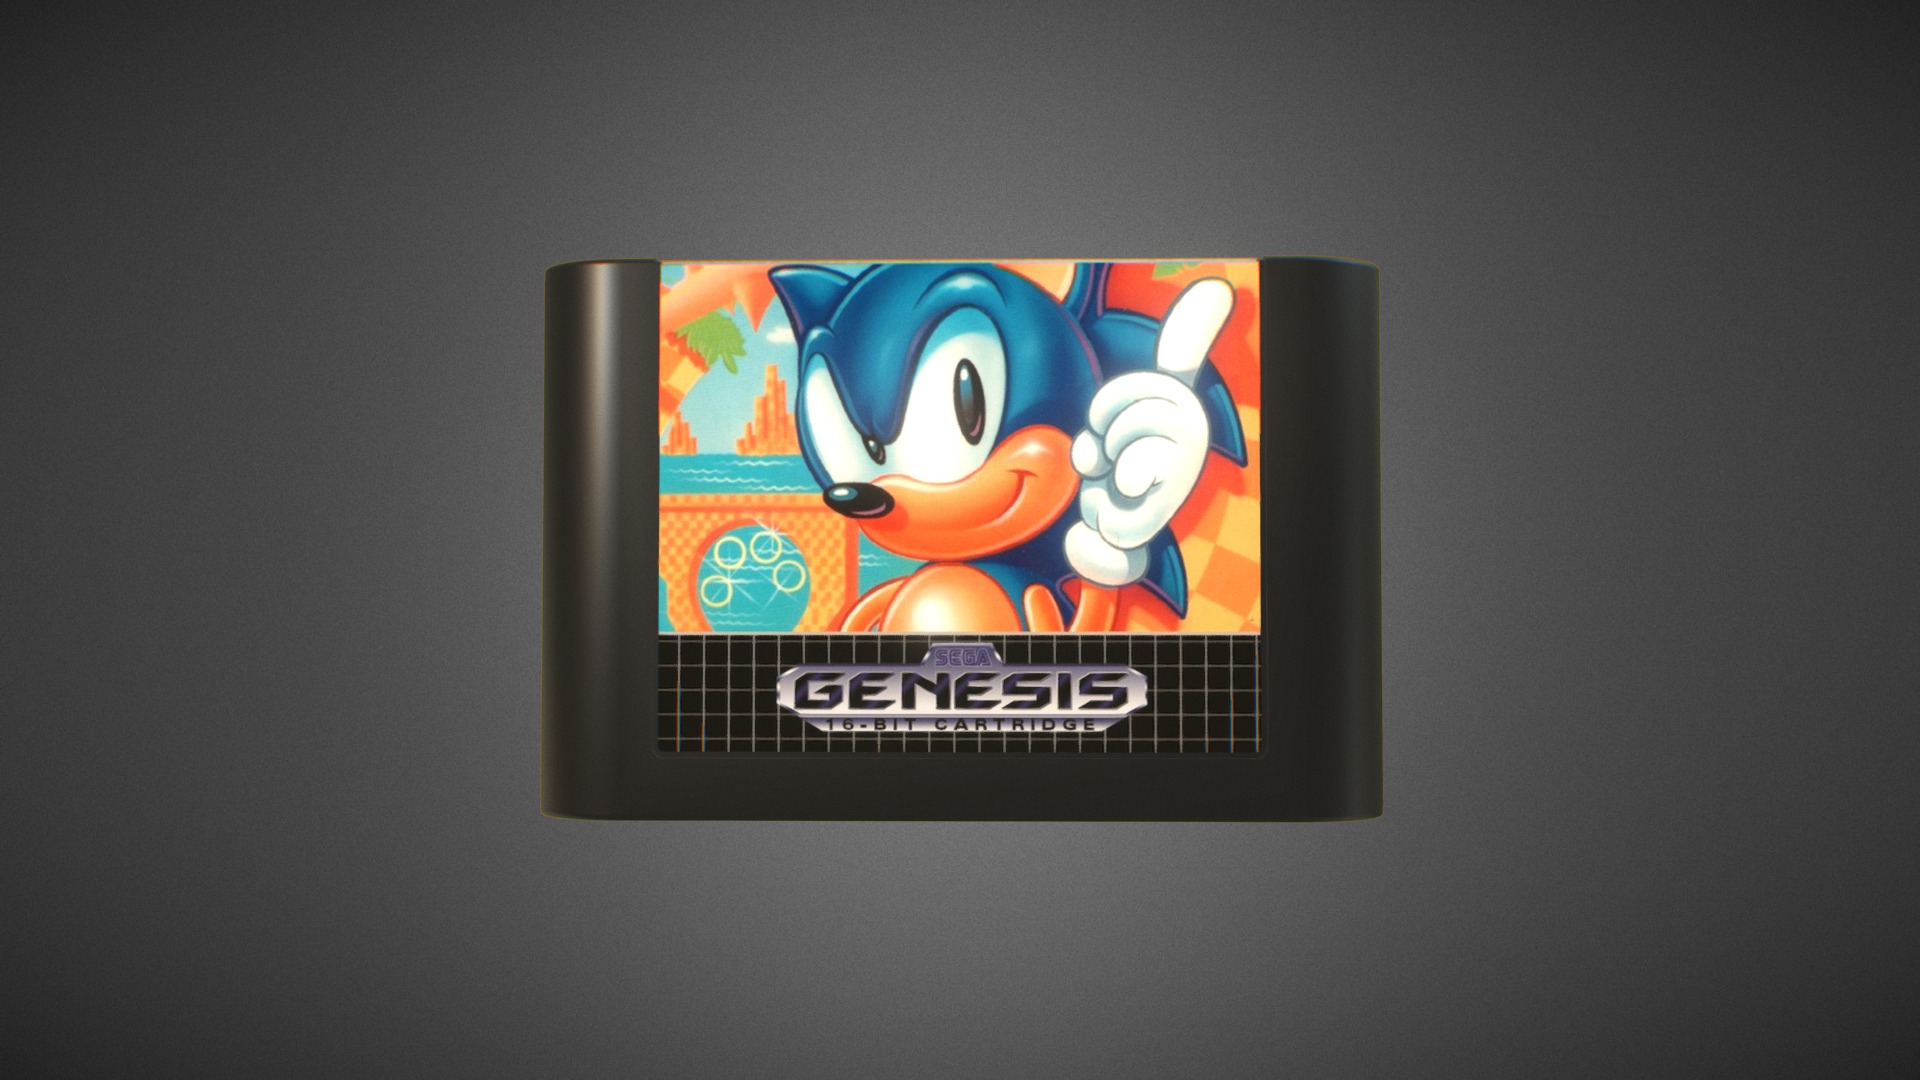 3D model Sega Genesis Game Cartridge - This is a 3D model of the Sega Genesis Game Cartridge. The 3D model is about a black and red logo.